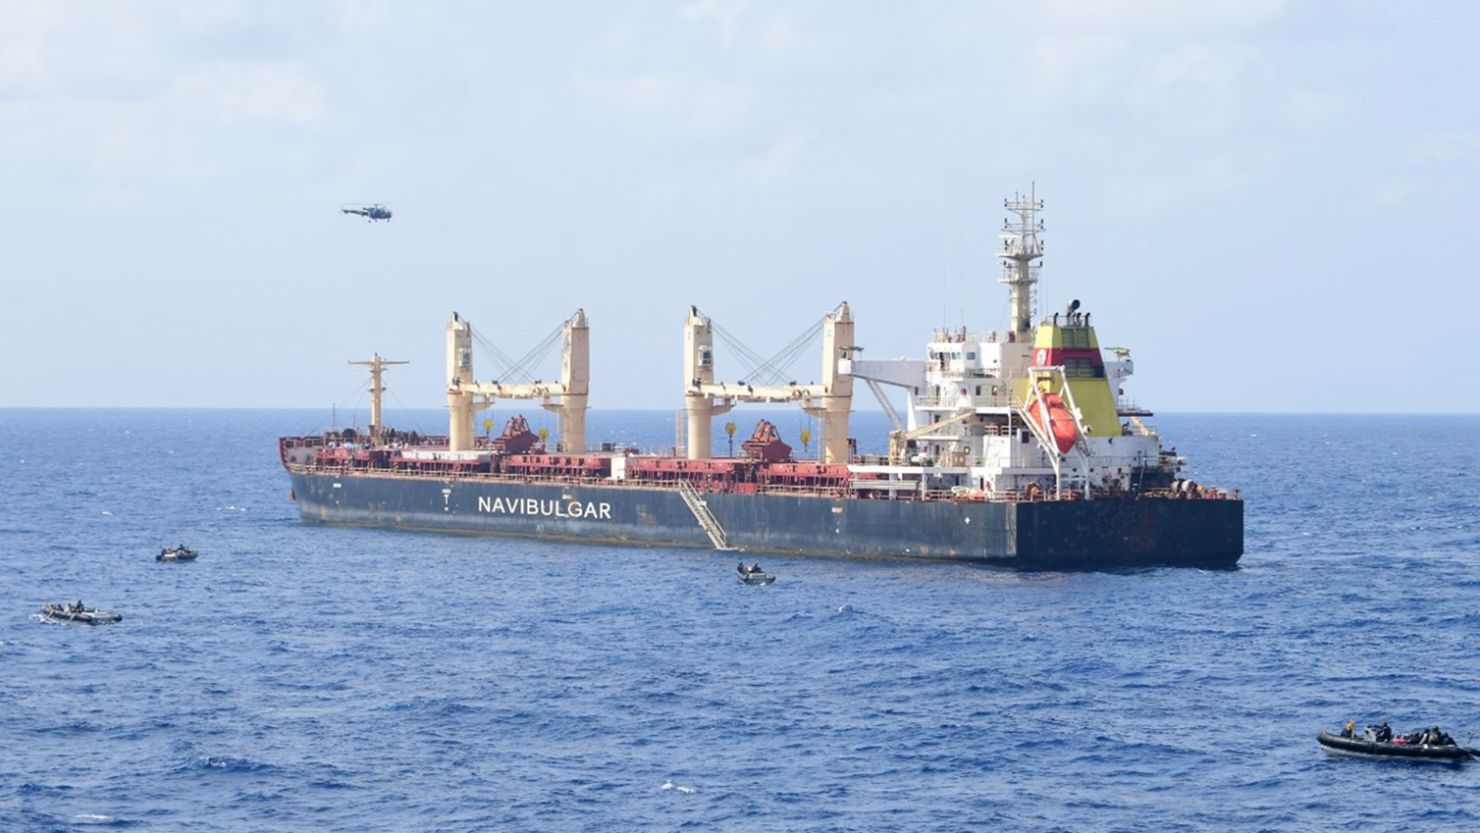 MARCOs conduct rescue ops on hijacked ship in Arabian sea